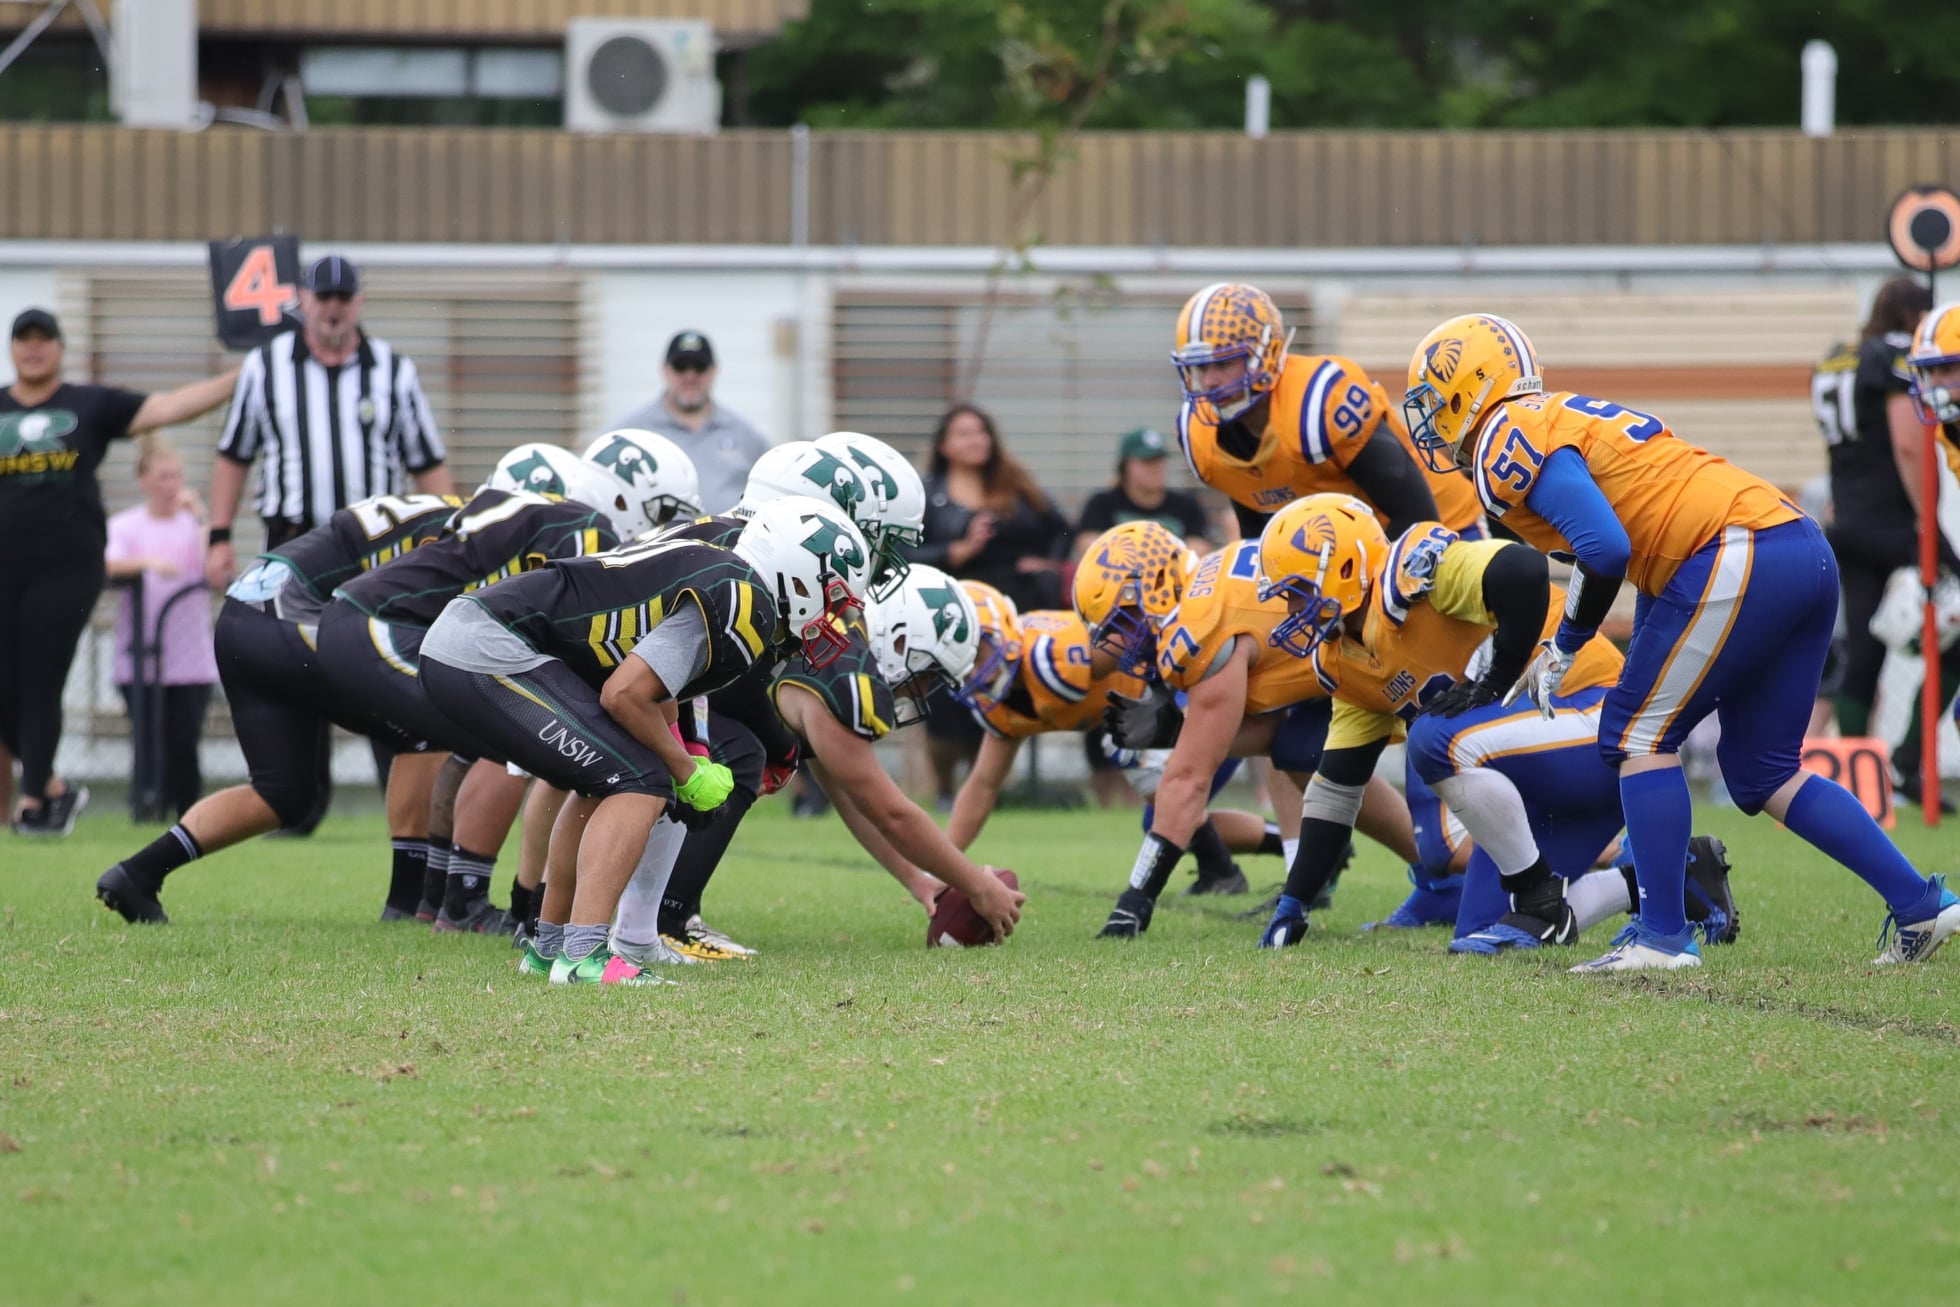 Members of UNSW Raiders and Sydney Uni gridiron teams during their preliminary final